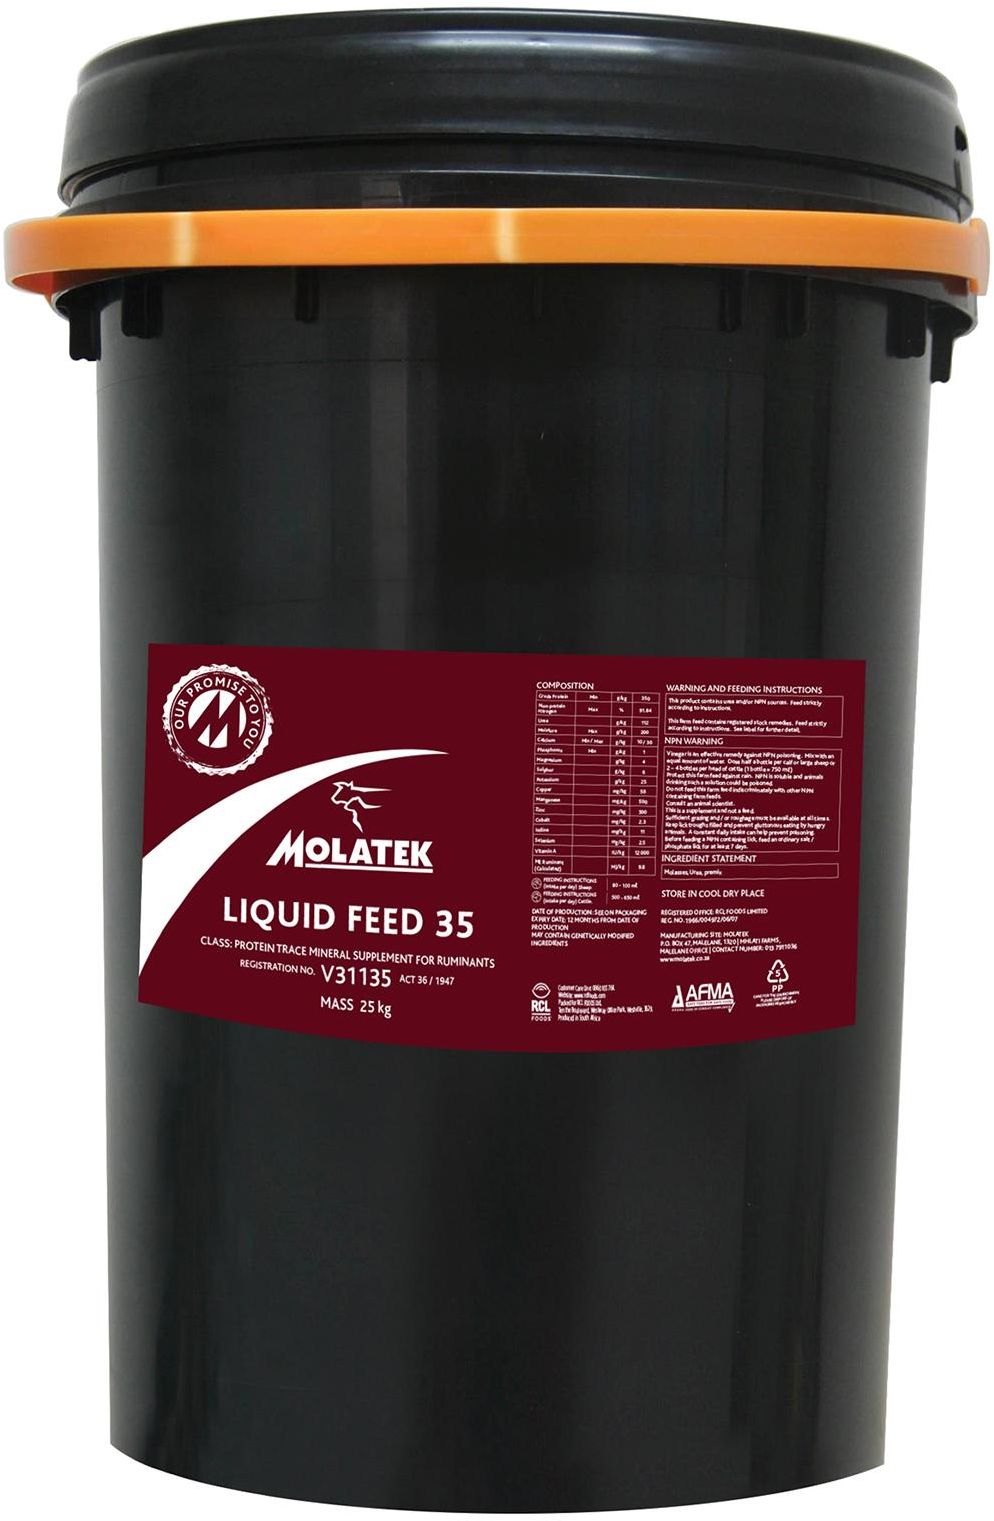 Molatek Liquid Feed 35 is a supplement that can be successfully applied were cattle and sheep graze together. It is an economical supplement of protein, energy, minerals and vitamin A. Highly palatable which increases the intake of dry veld pasture and roughage. It contains protein in the form of nitrogen for the microbes in the rumen, and readily available energy in the form of sugar (molasses), phosphate and trace minerals. It also increases the intake and digestion of poor quality roughage. Ensures the safe intake and efficient utilisation of urea nitrogen, because the urea is dissolved in the molasses during the production process. It must not be used in combination with other products containing urea.